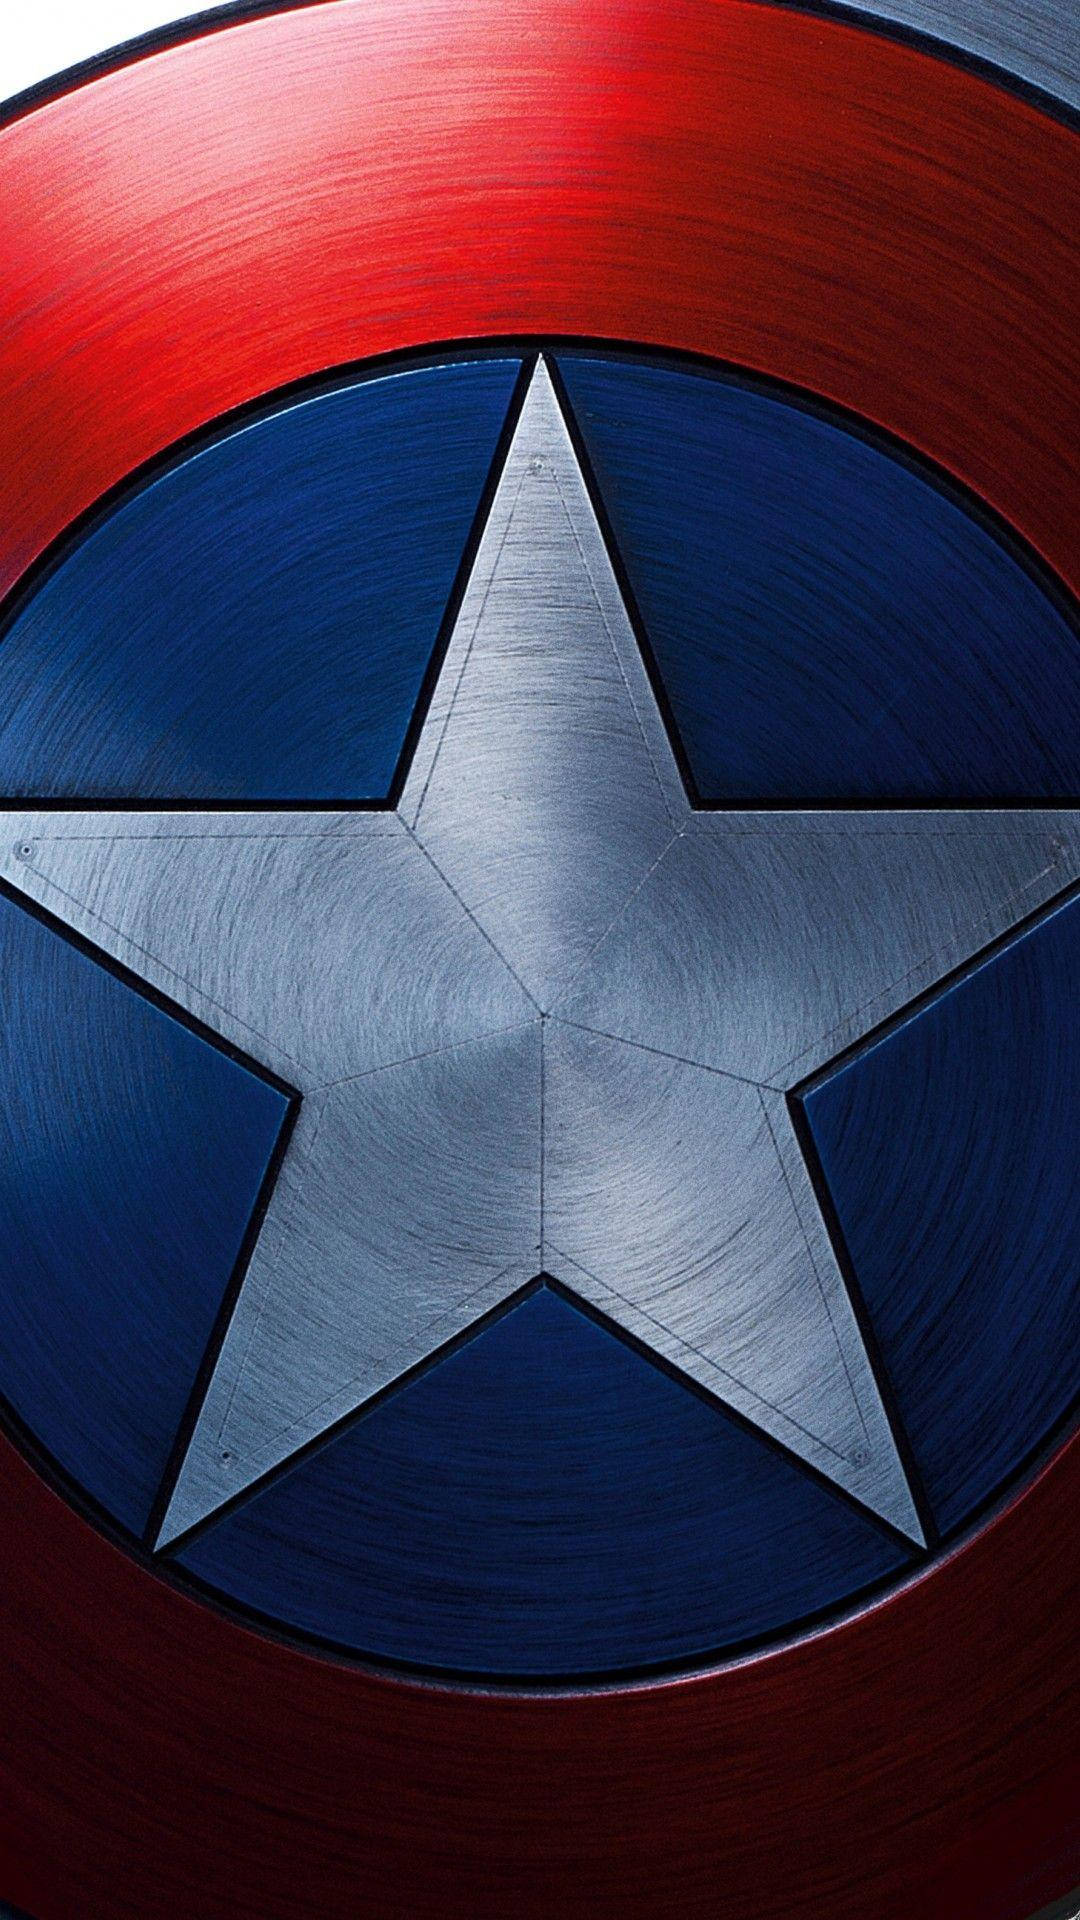 Top 999+ Captain America Shield Iphone Wallpaper Full HD, 4K✅Free to Use